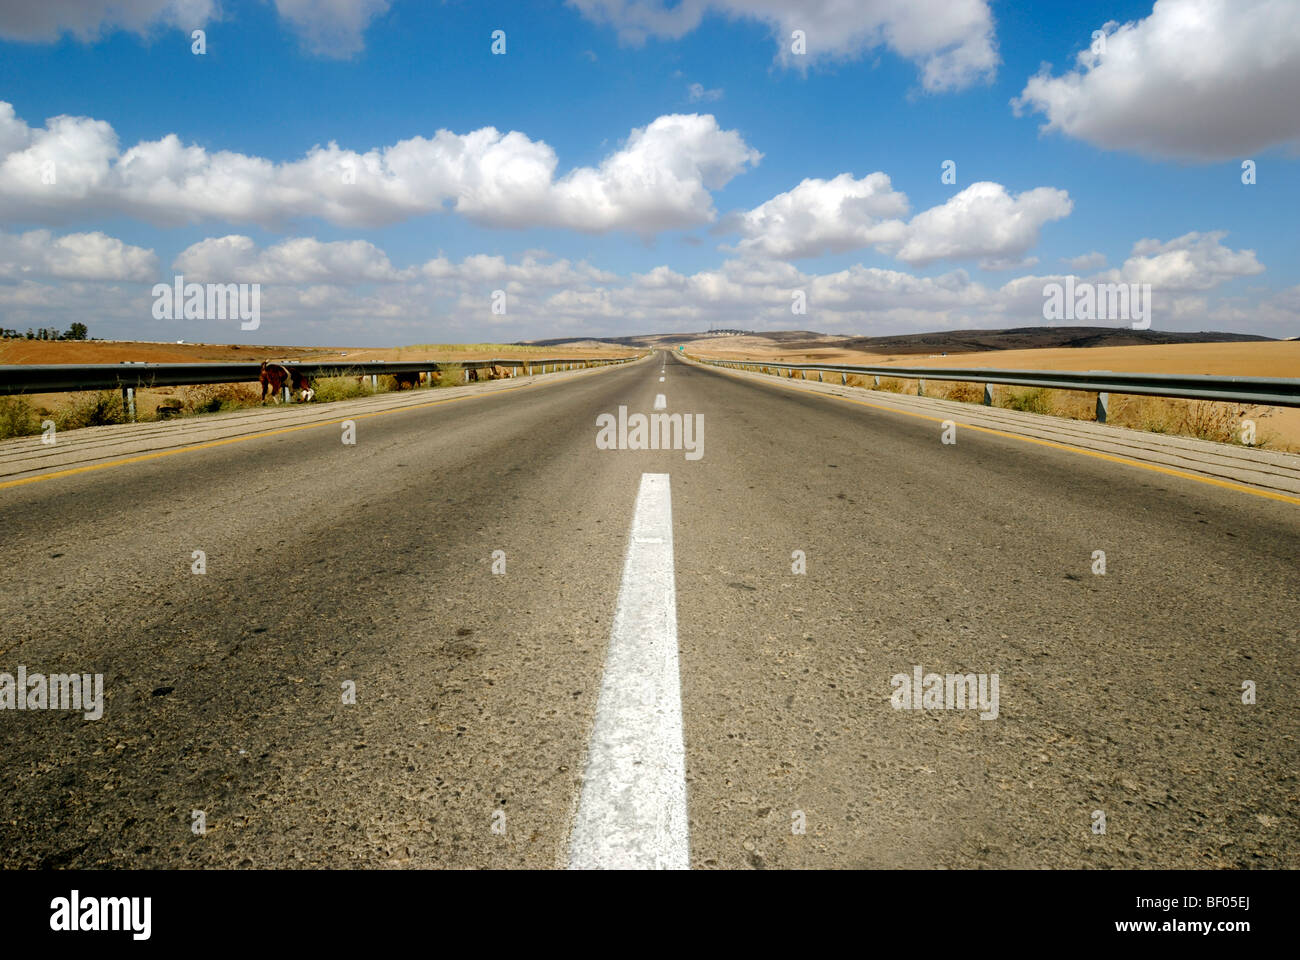 Australian, western New South Wales, Endless road to nowhere running into the horizon blue sky with clouds Stock Photo